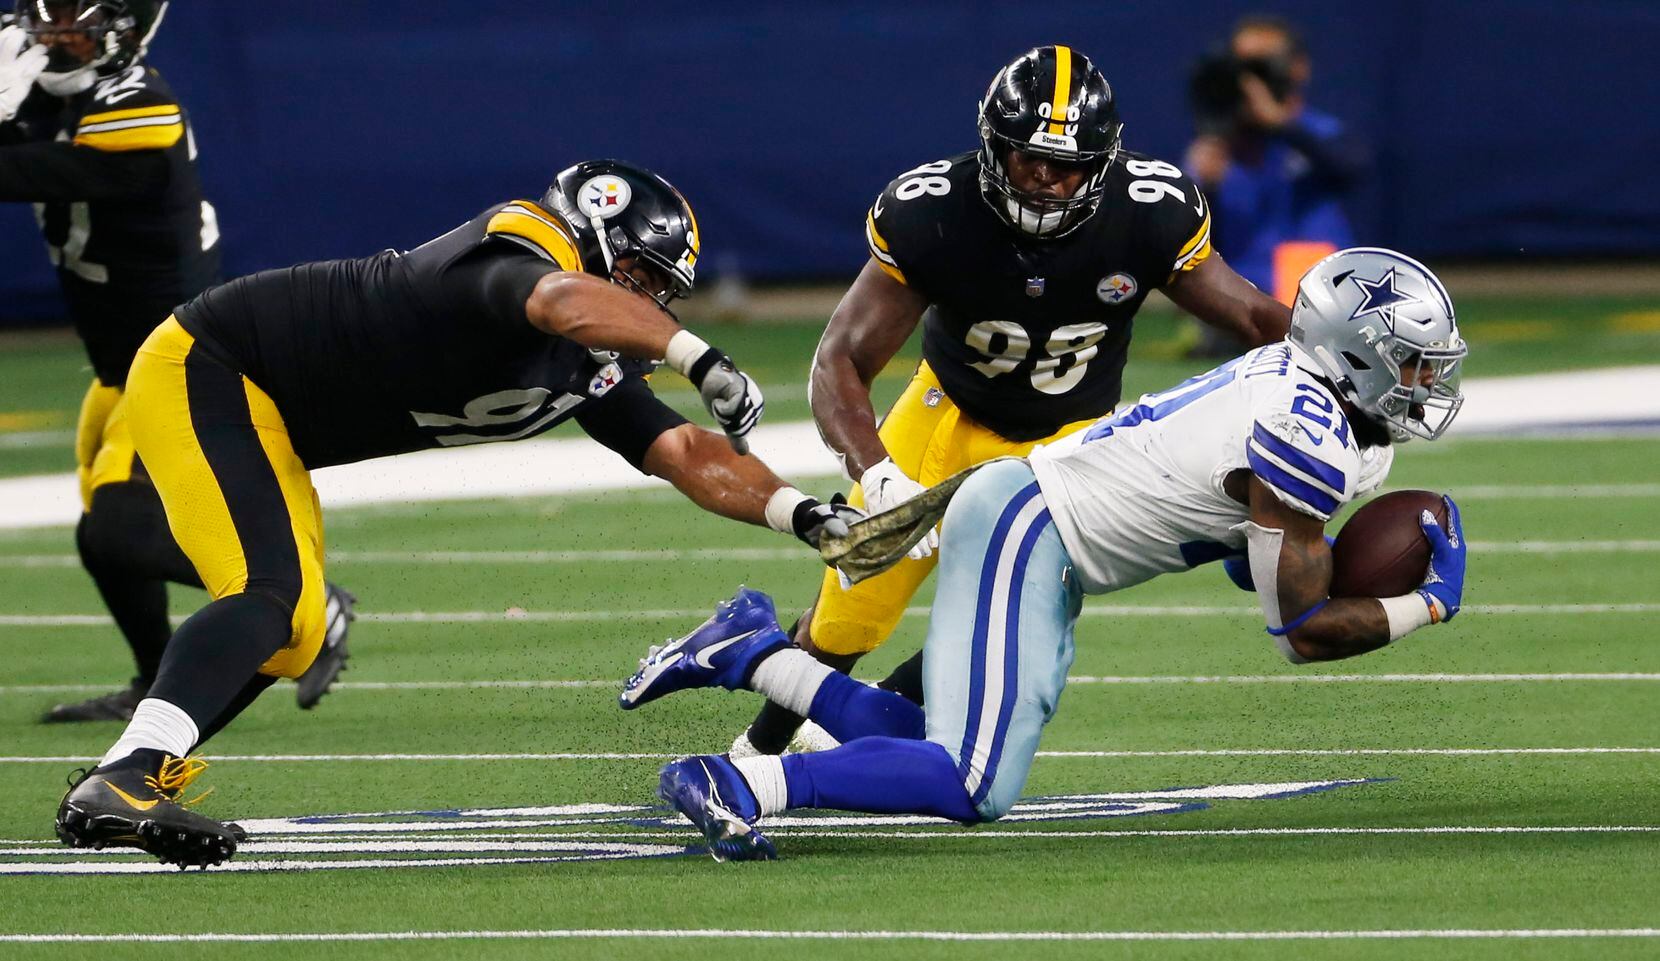 Dallas Cowboys running back Ezekiel Elliott (21) is brought down by Pittsburgh Steelers defensive end Stephon Tuitt (91) and Pittsburgh Steelers inside linebacker Vince Williams (98) during the third quarter of play at AT&T Stadium in Arlington, Texas on Sunday, November 8, 2020. (Vernon Bryant/The Dallas Morning News)